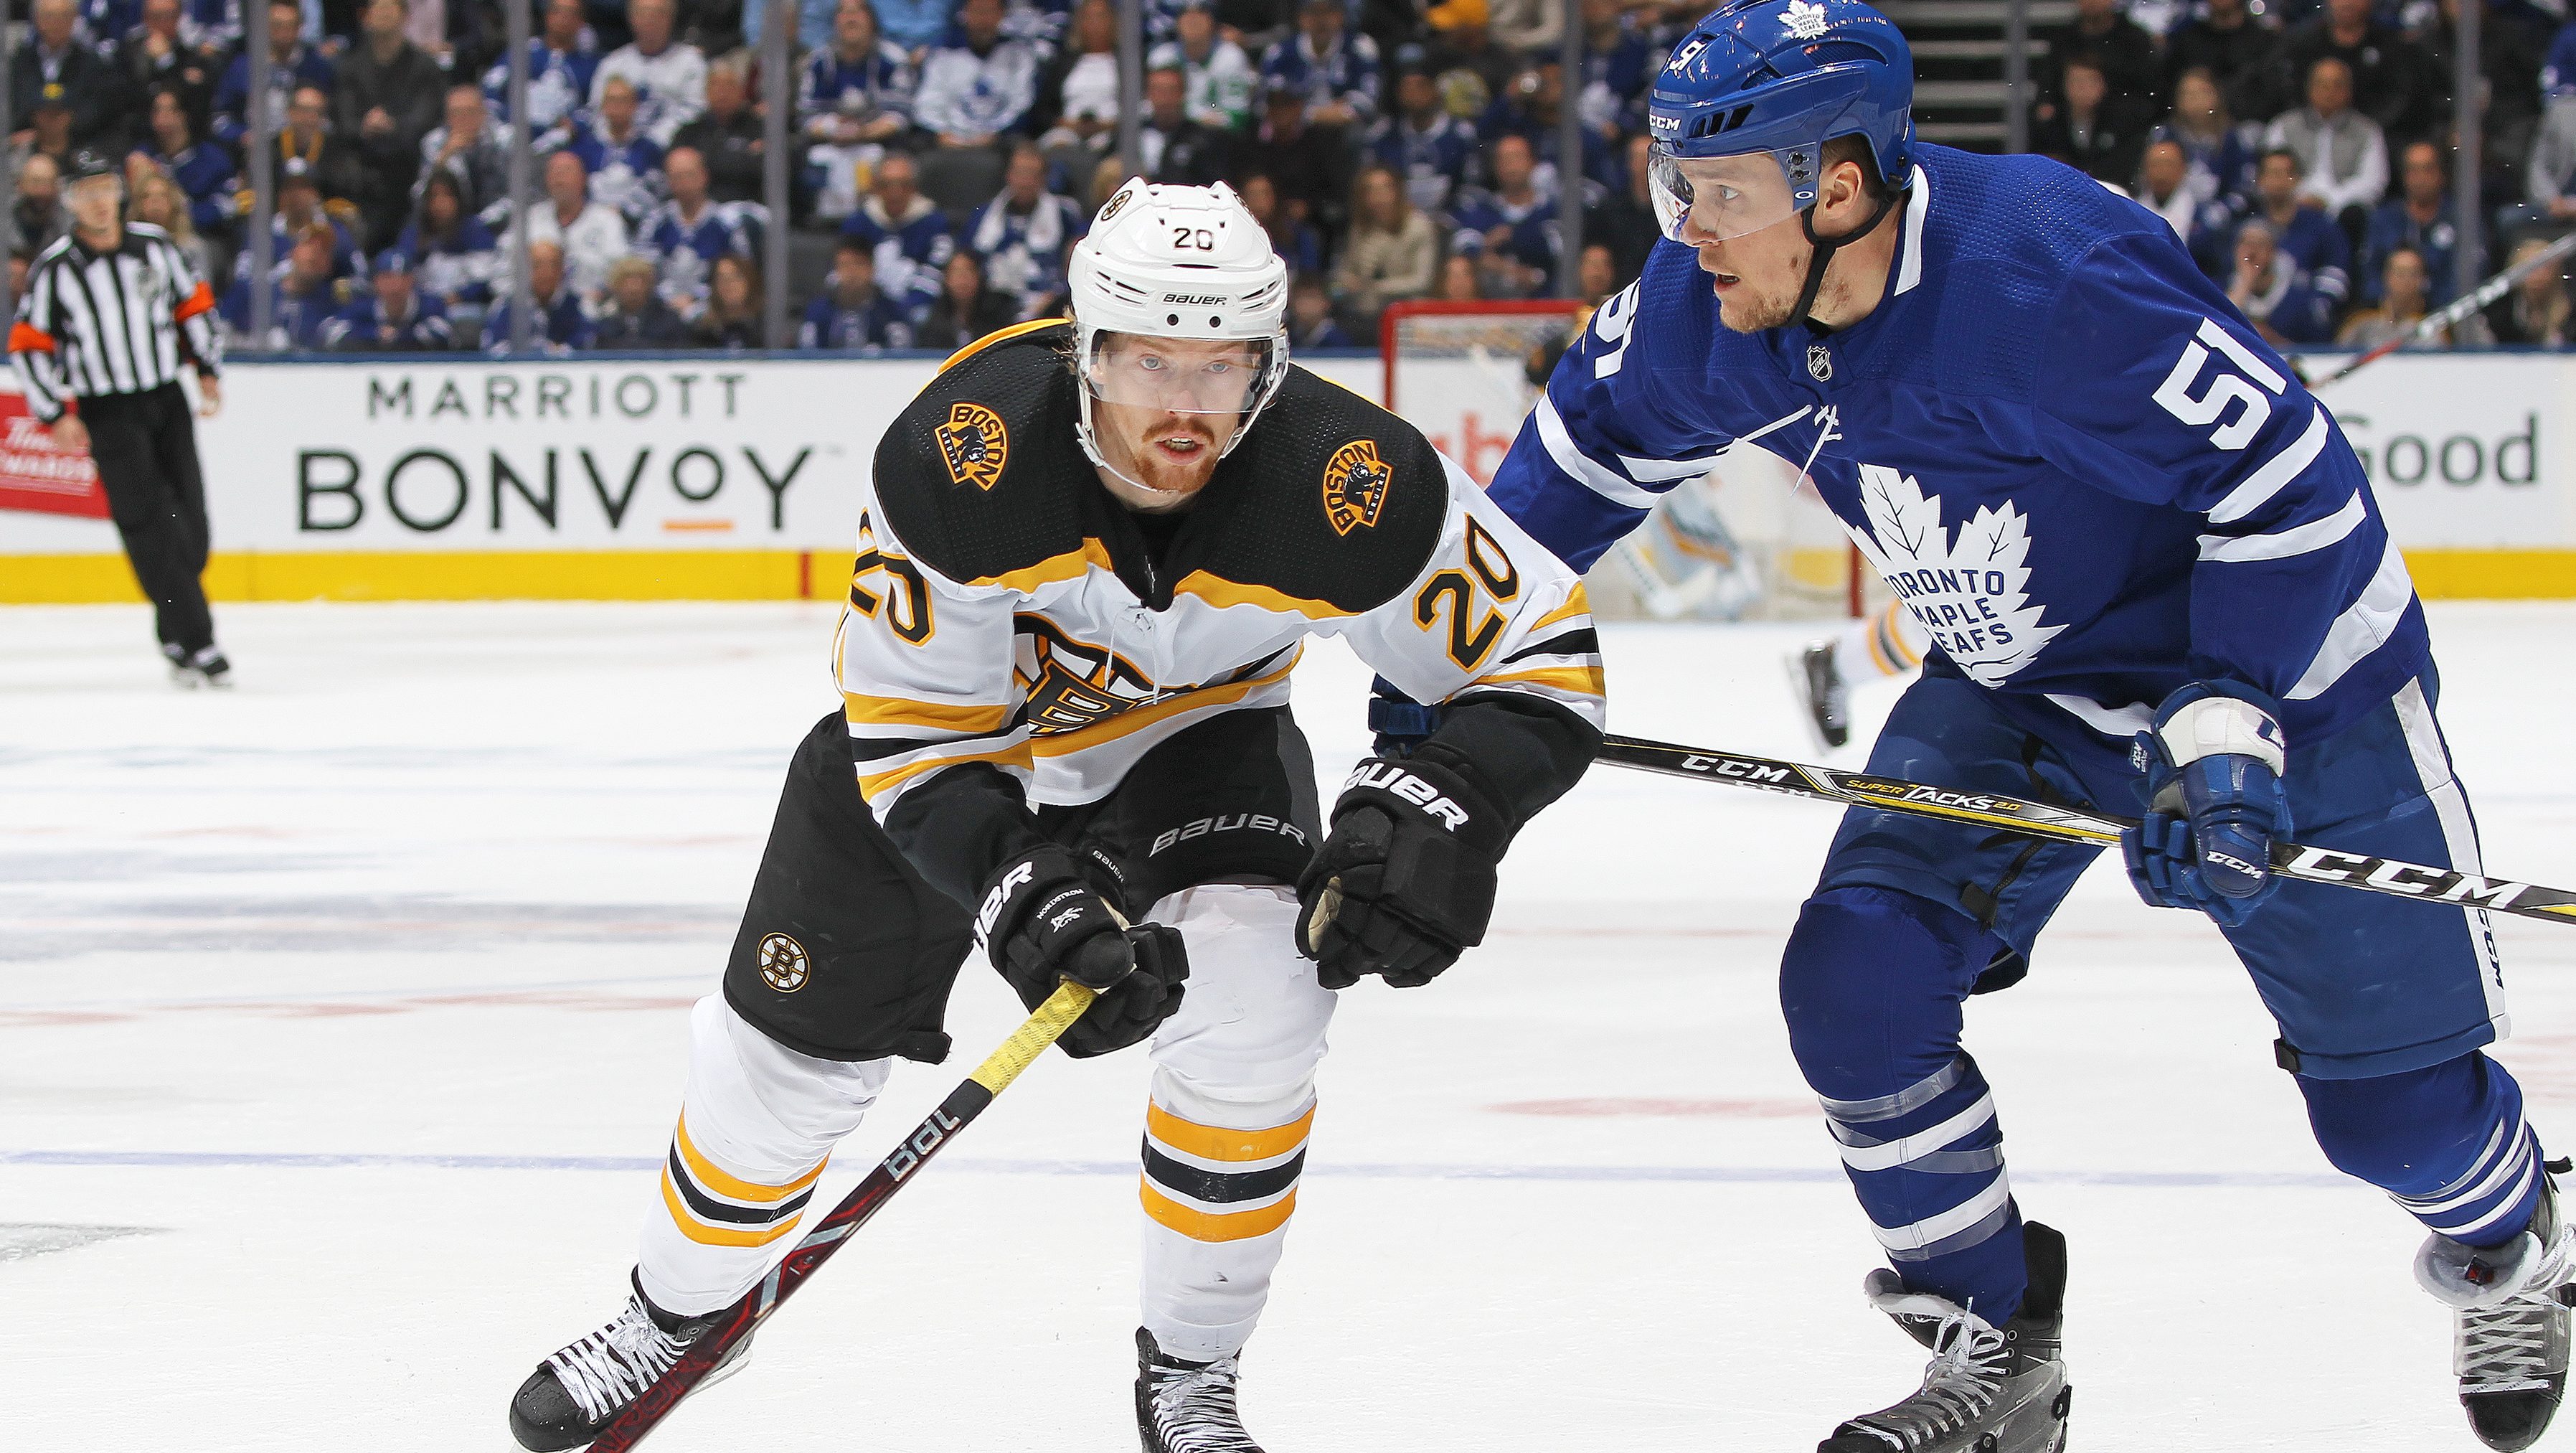 How to Watch Maple Leafs vs Bruins Game 7 Online